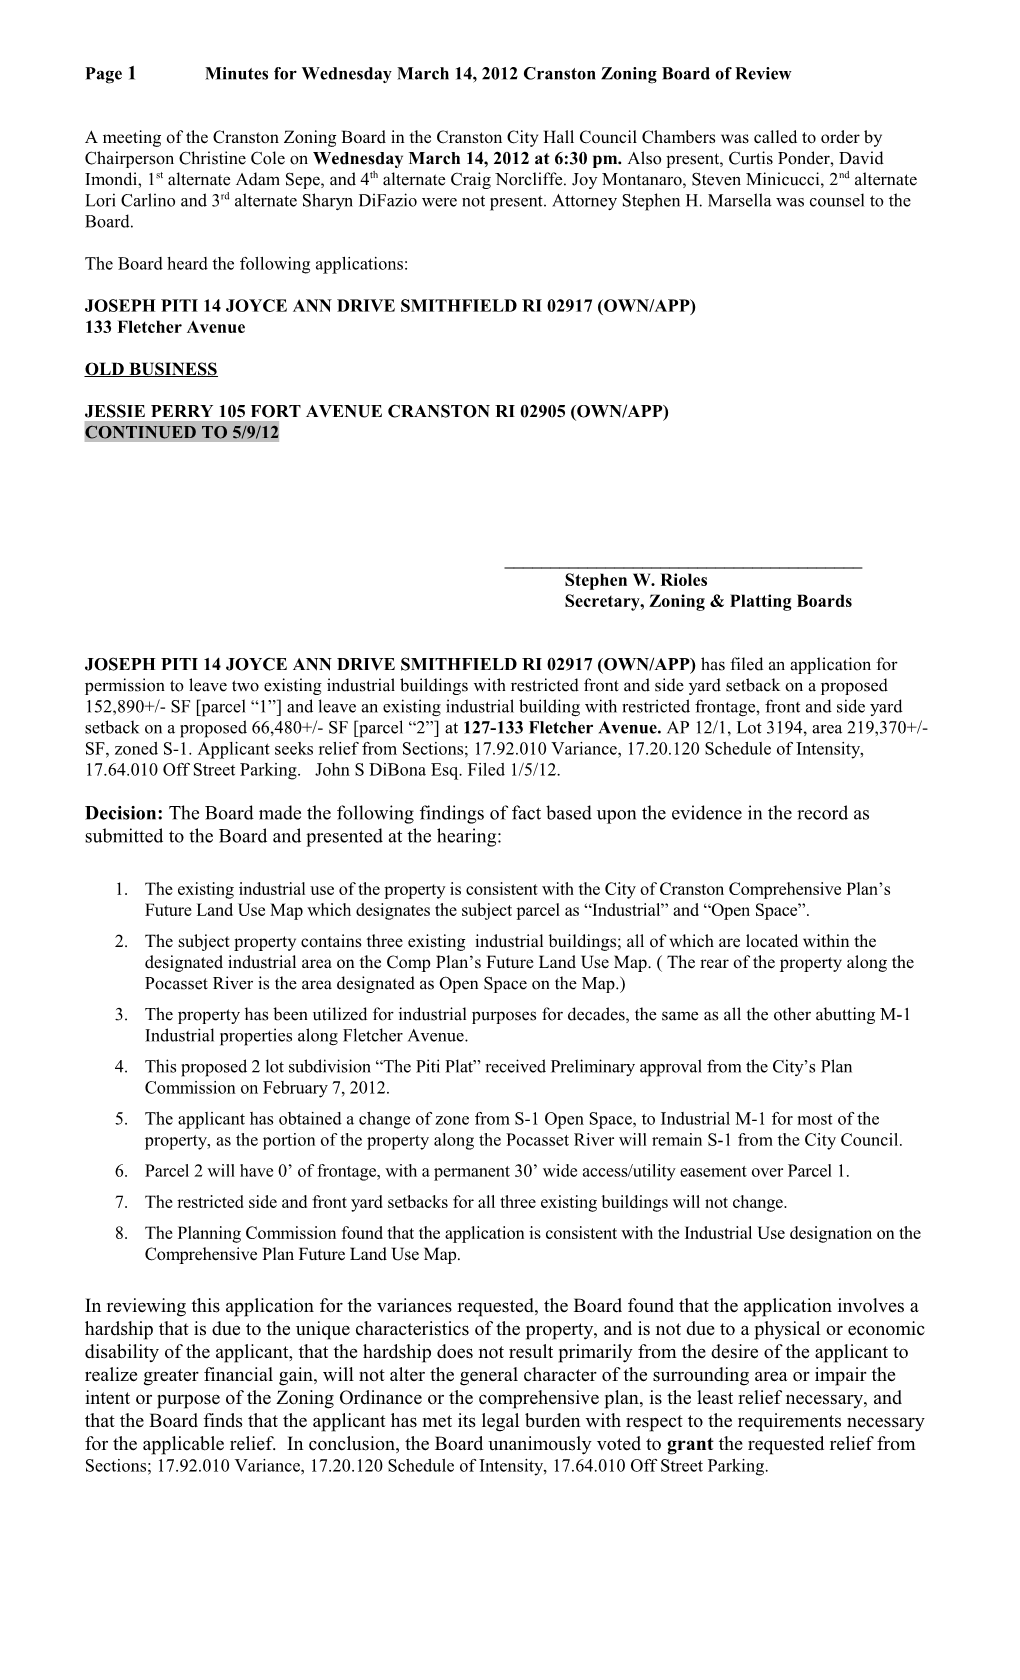 Page 1Minutes for Wednesday March 14, 2012Cranston Zoning Board of Review